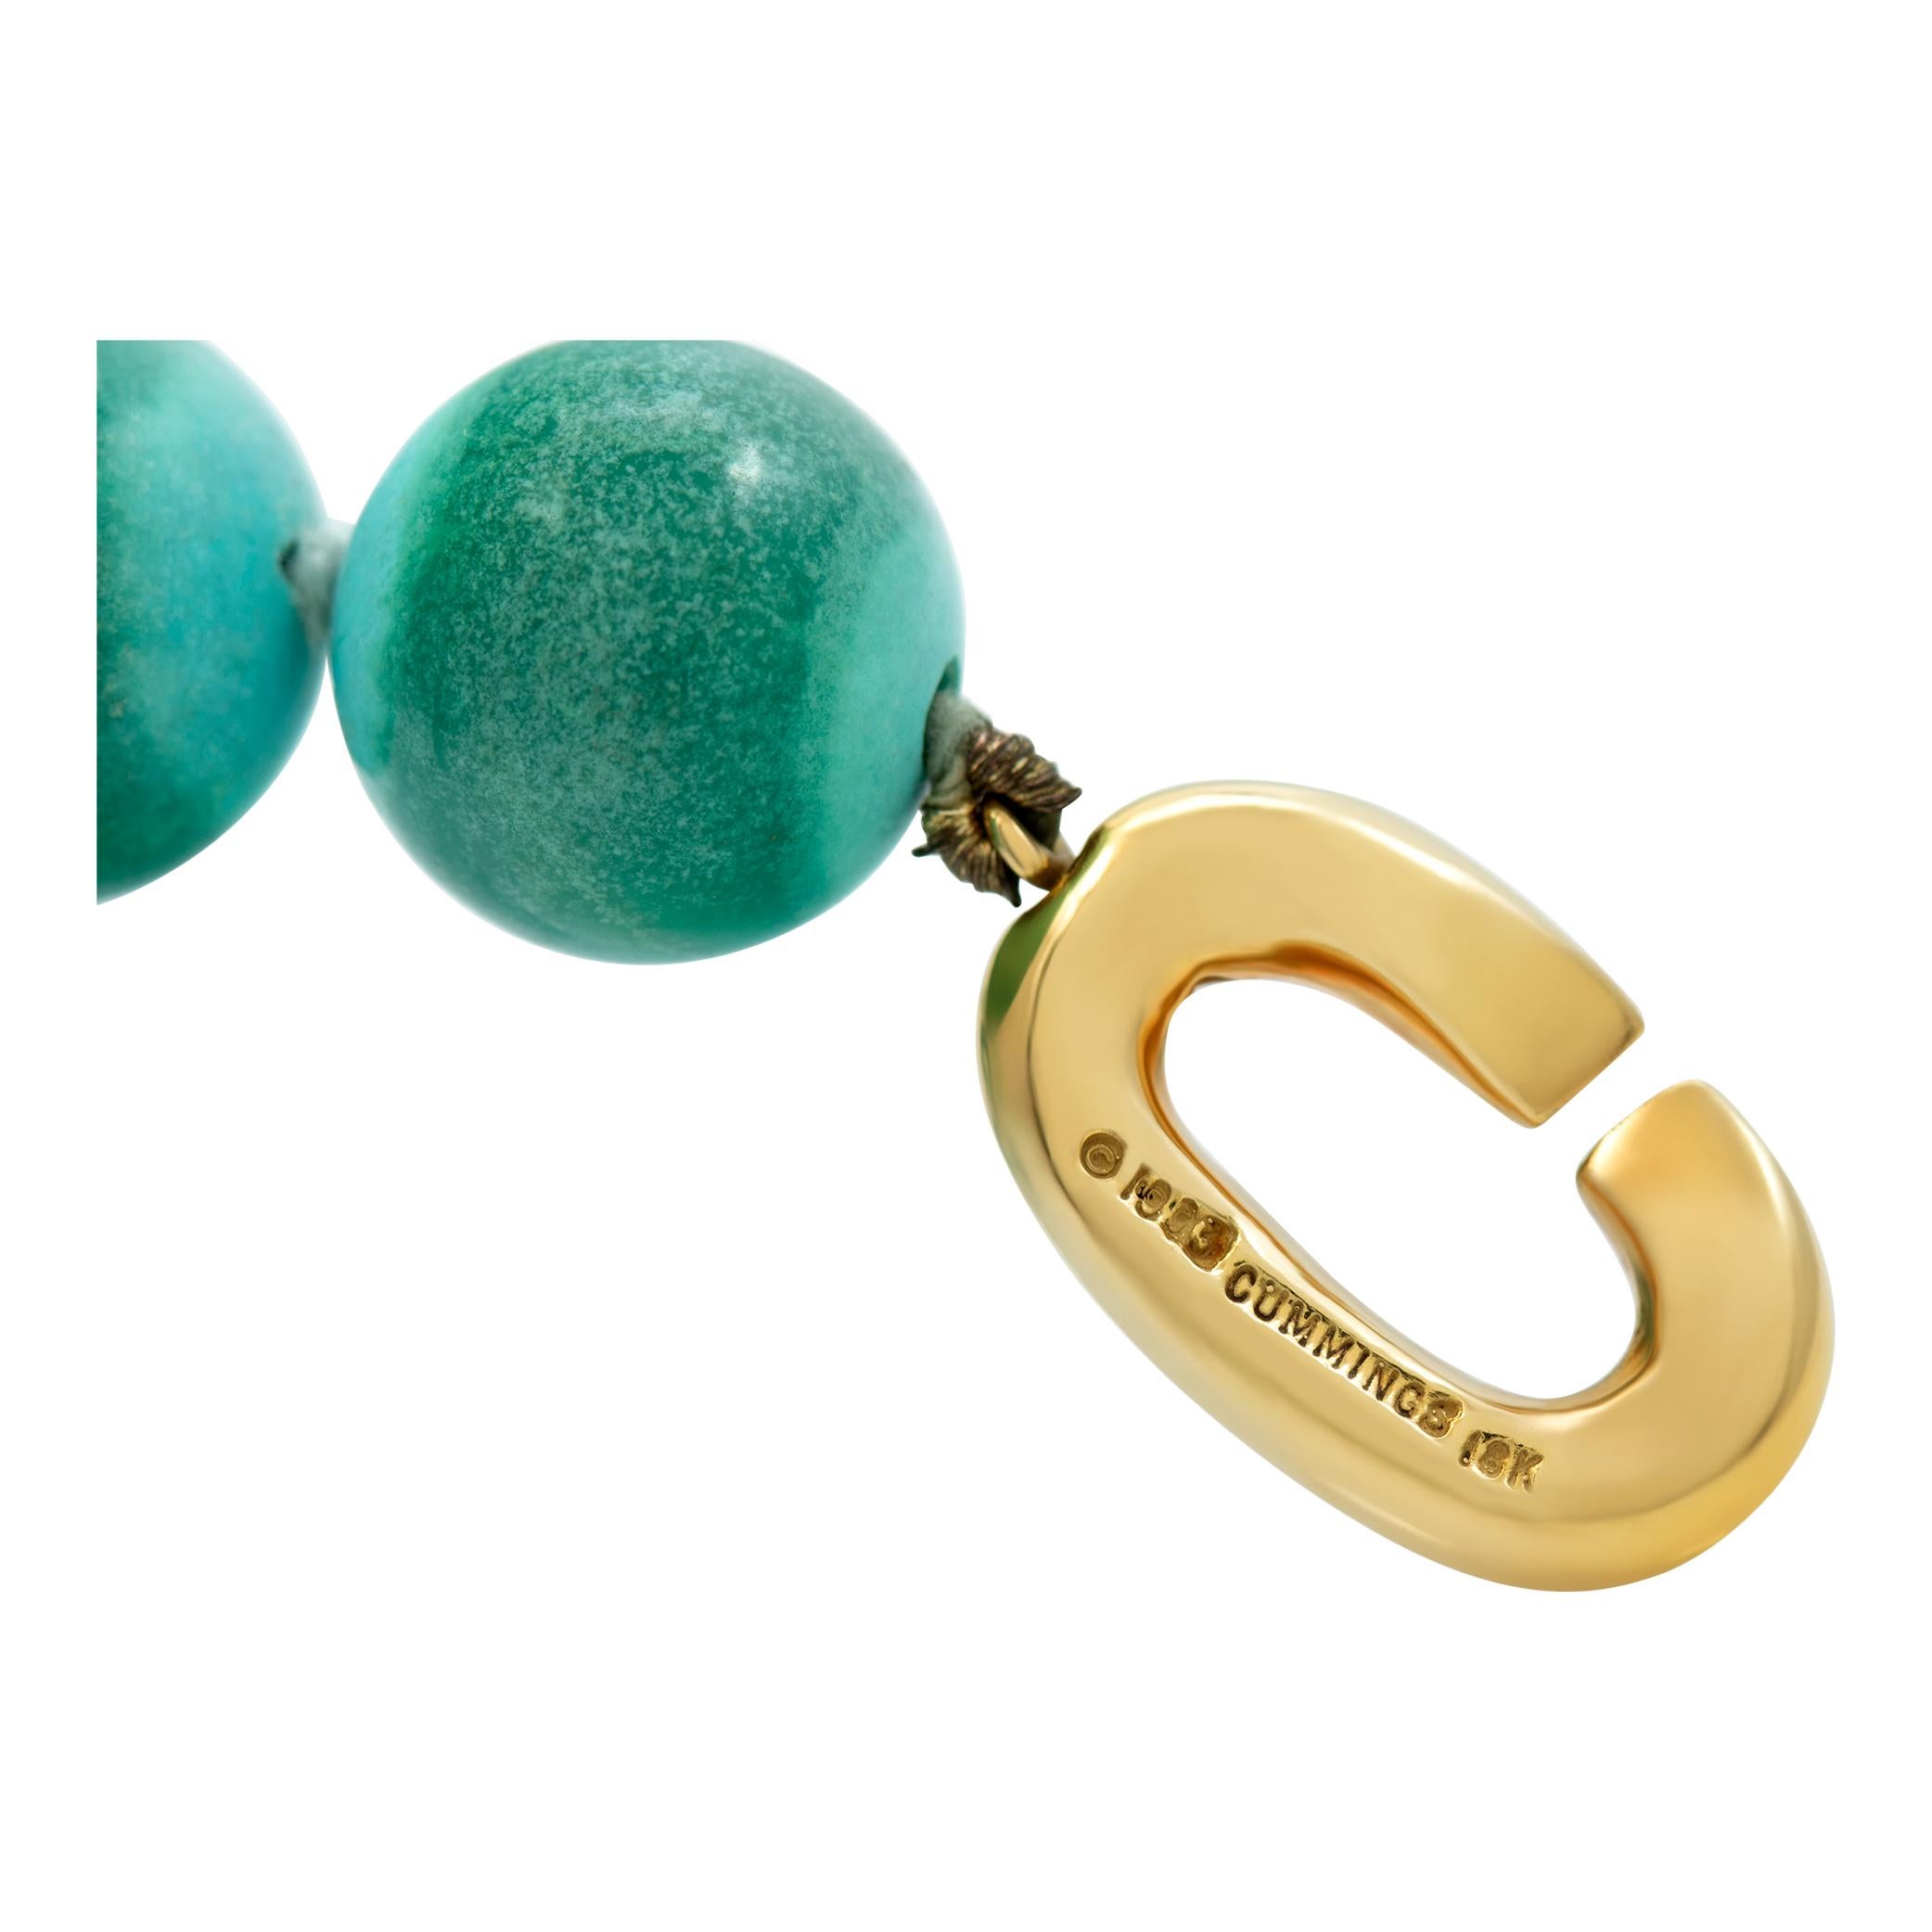 Angela Cummings Turquoise Bead Necklace with 18k gold clasp For Sale 2